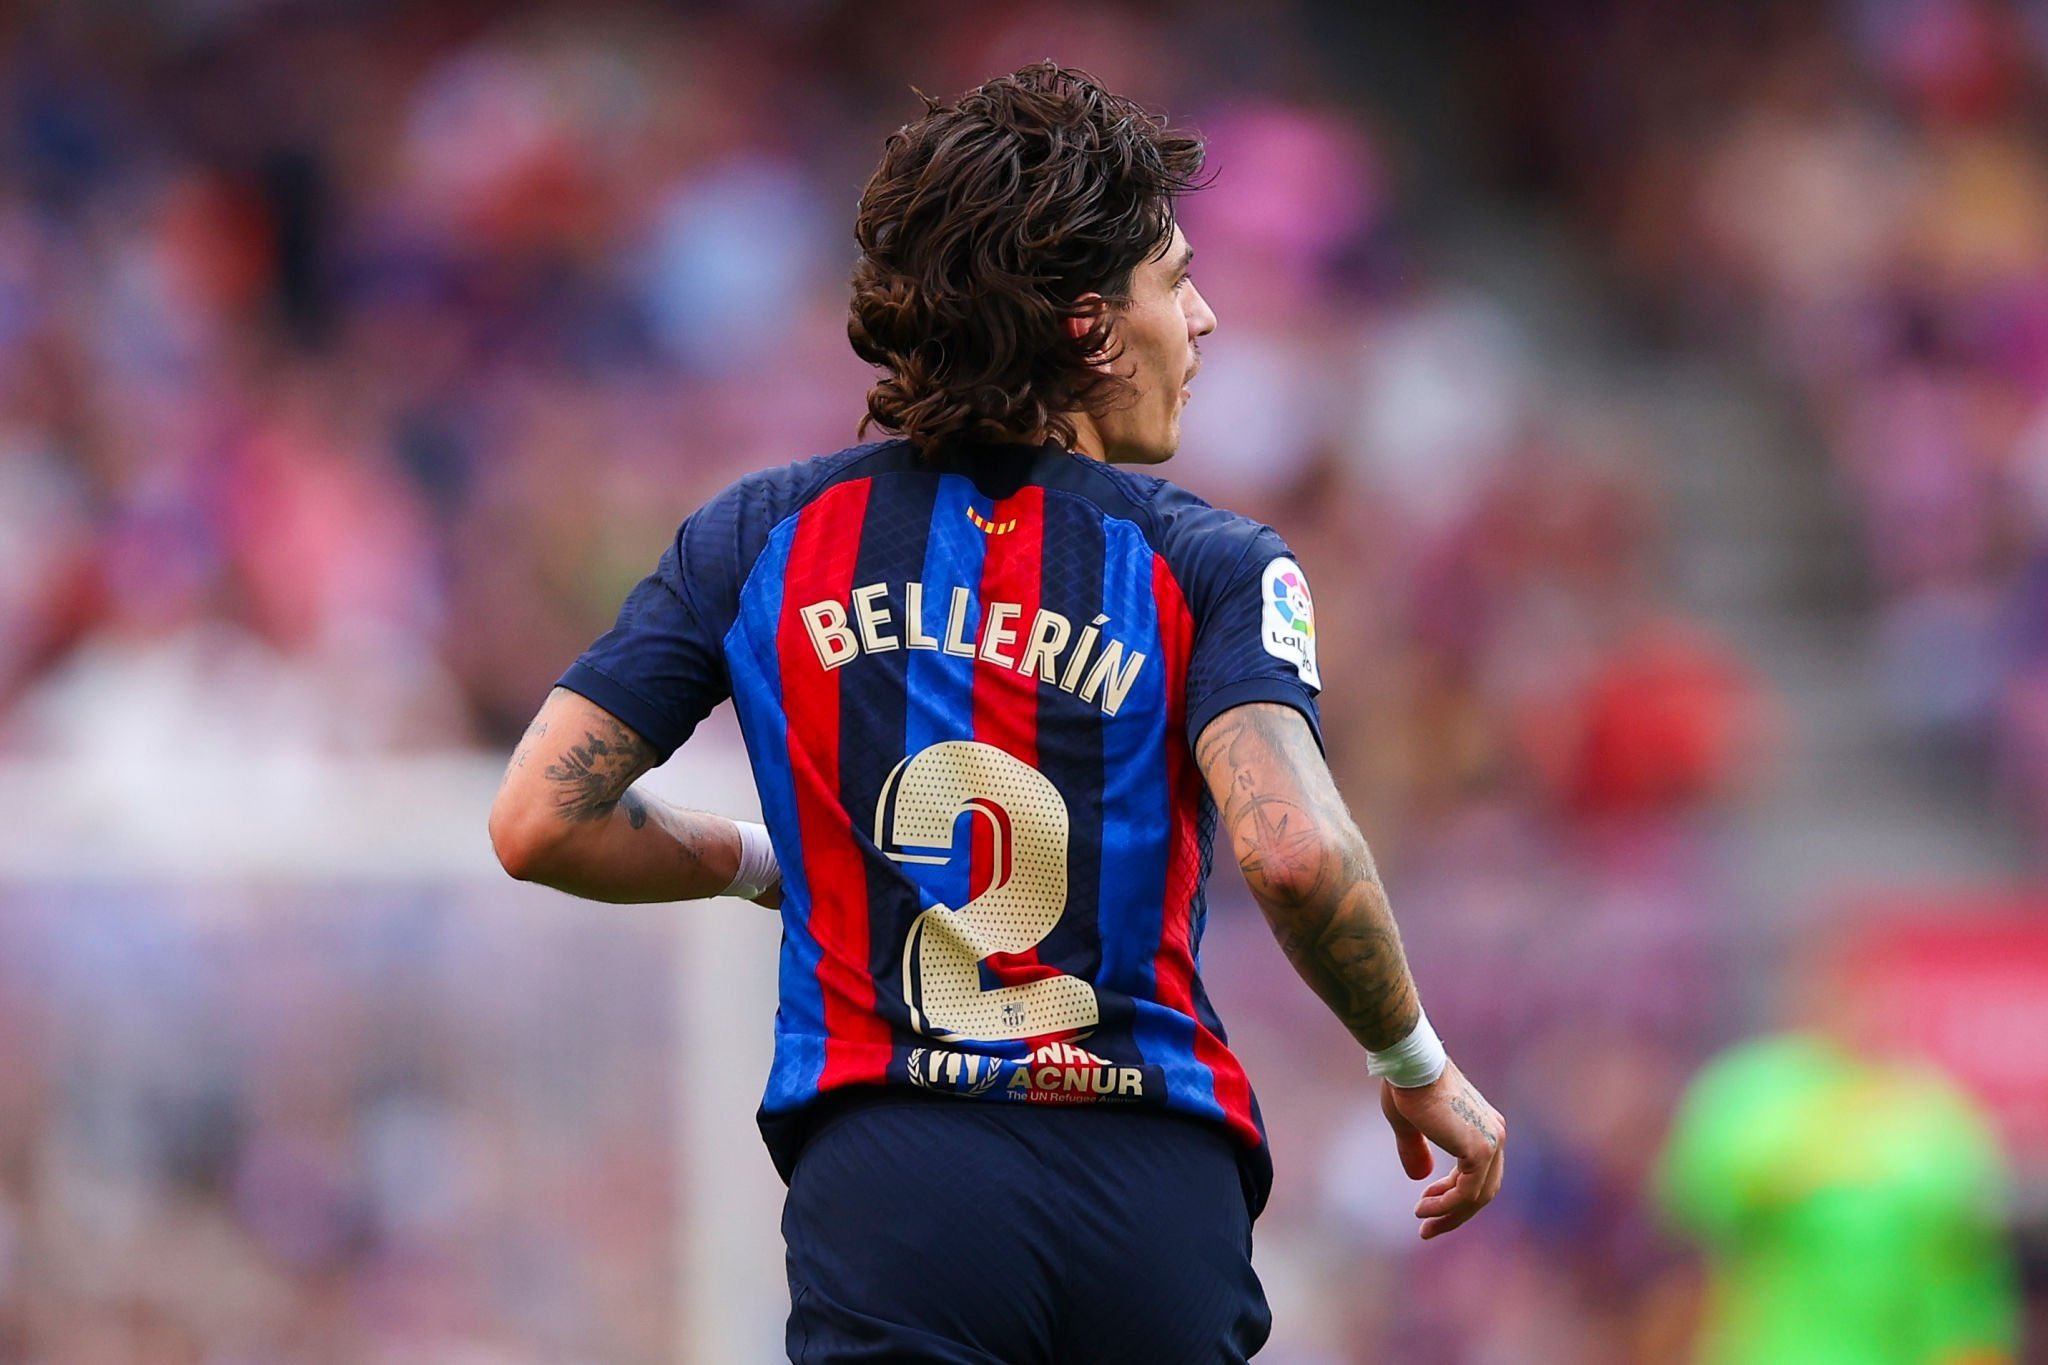 ‘Useless’ – Barcelona criticised for Hector Bellerin signing after meagre statistics